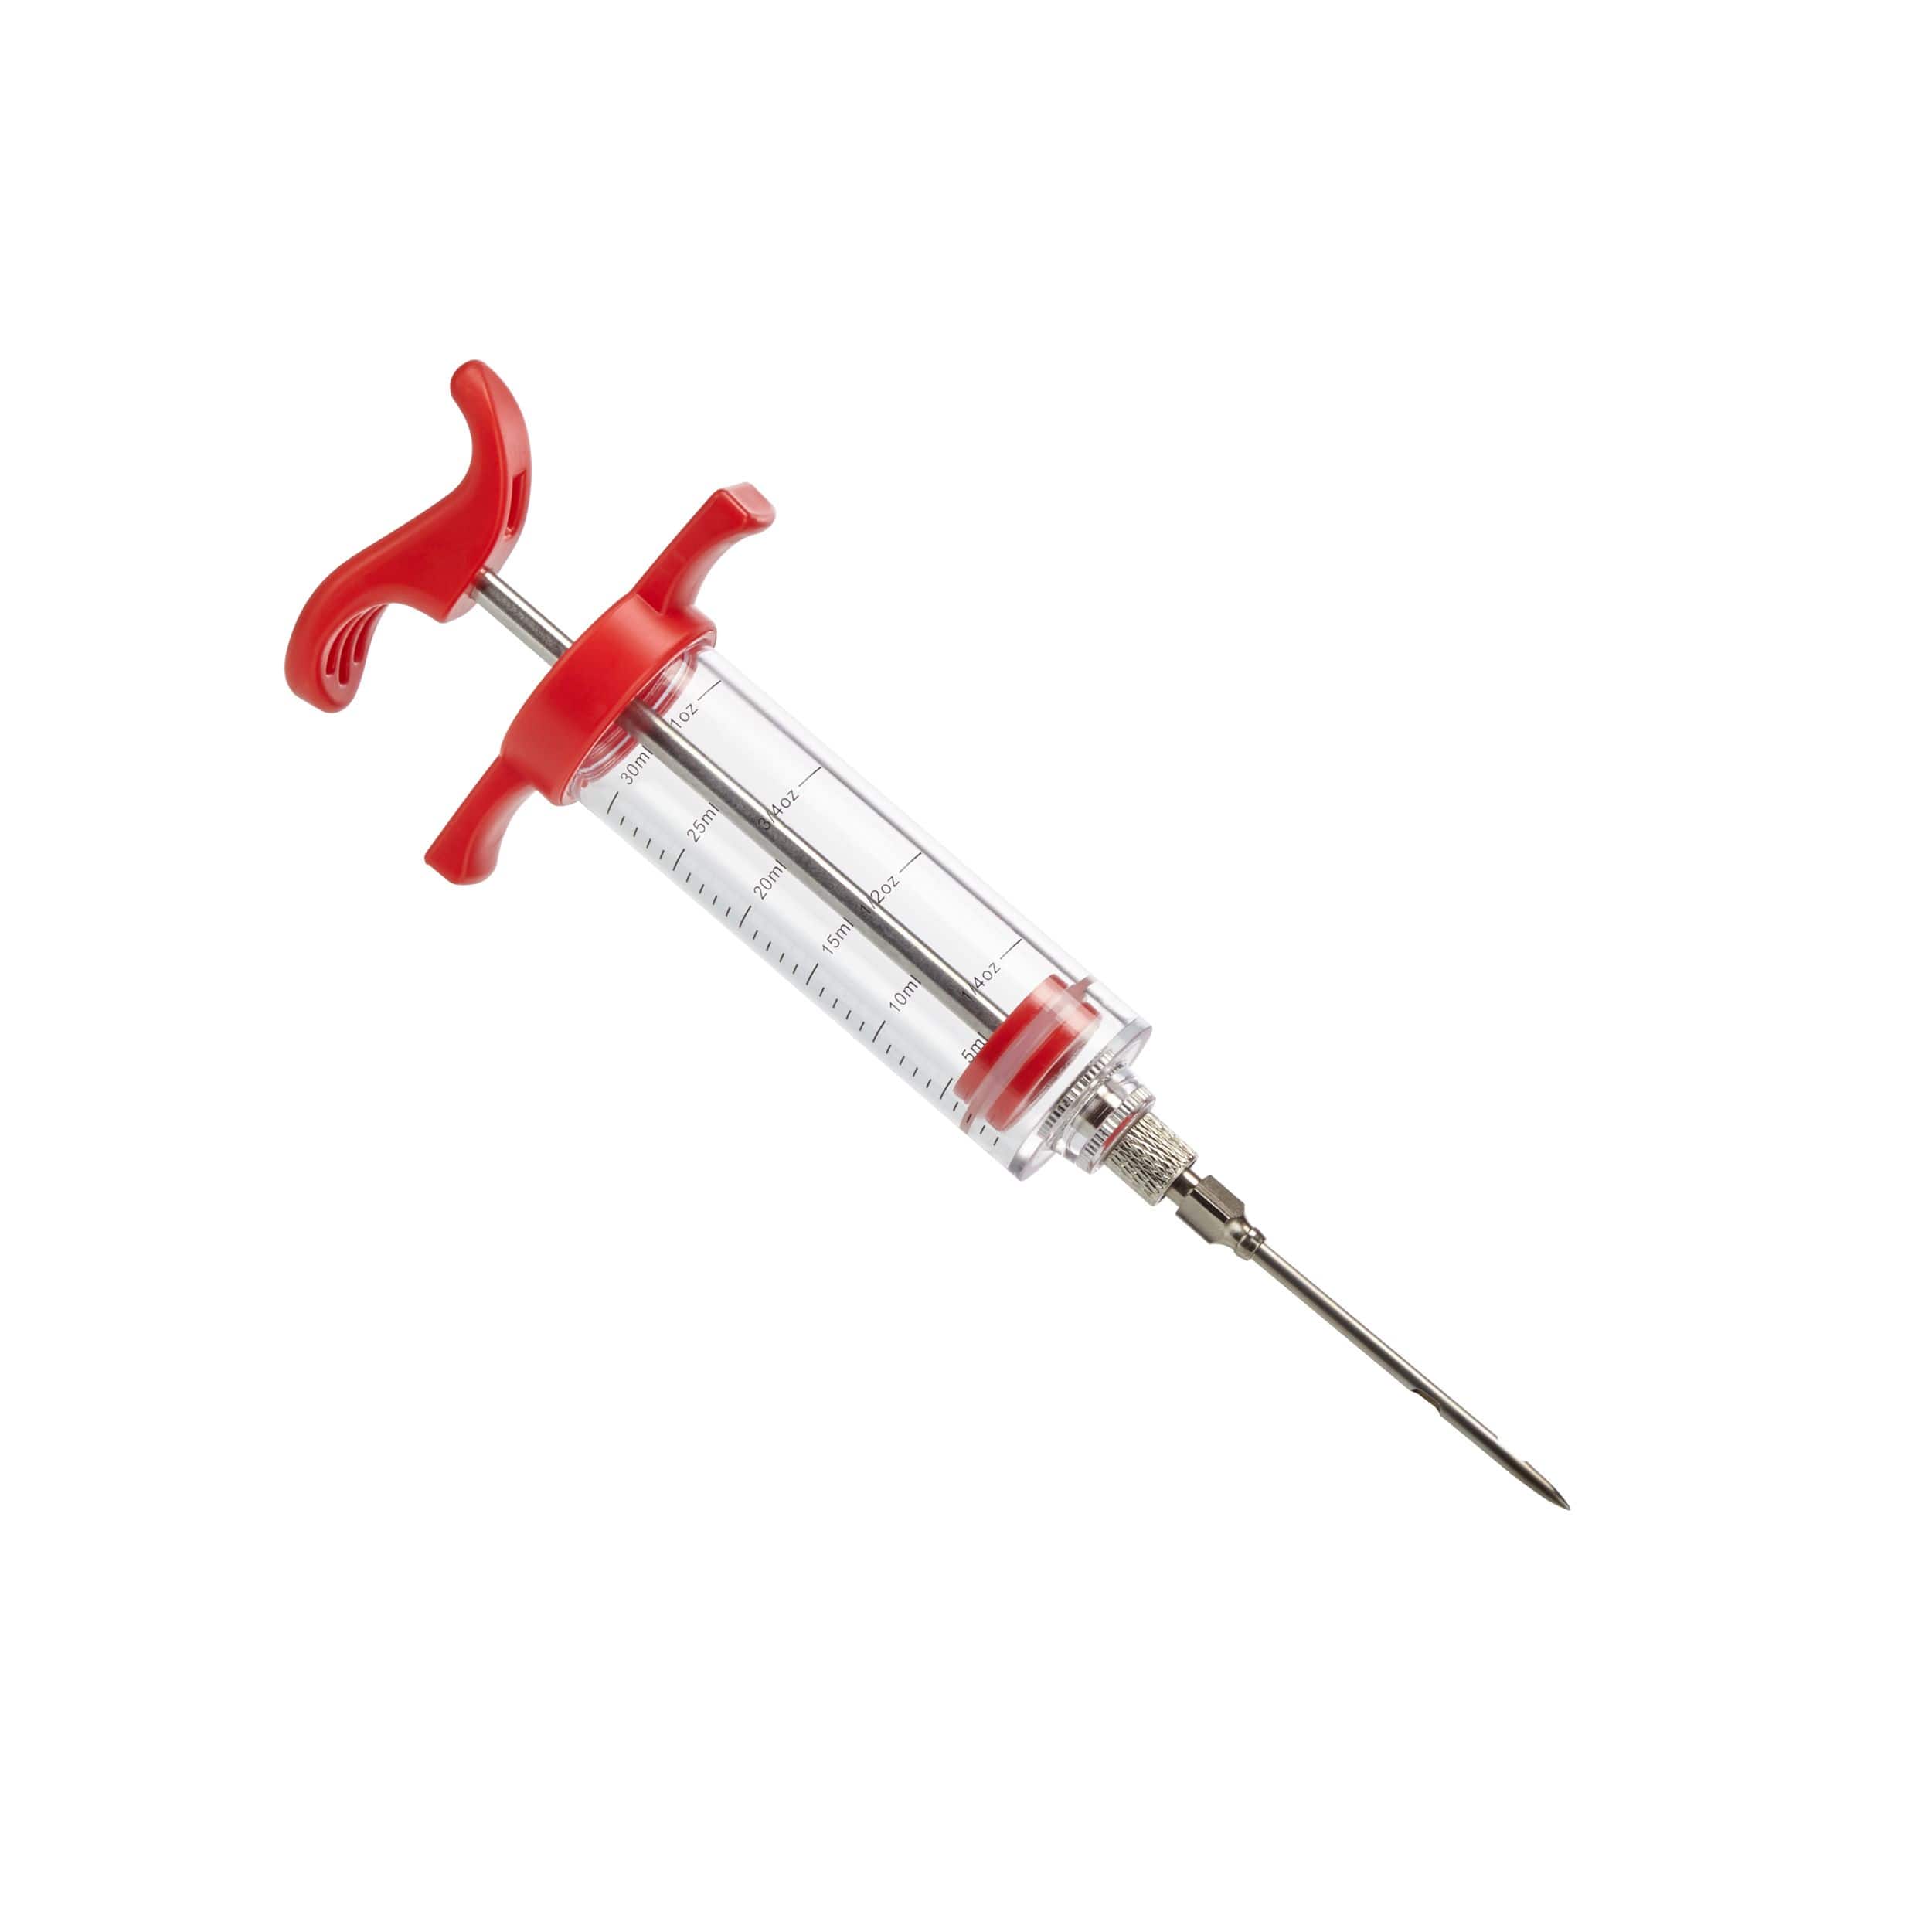 MASTER Chef Stainless Steel Marinade Meat Injector Syringe, 30-mL